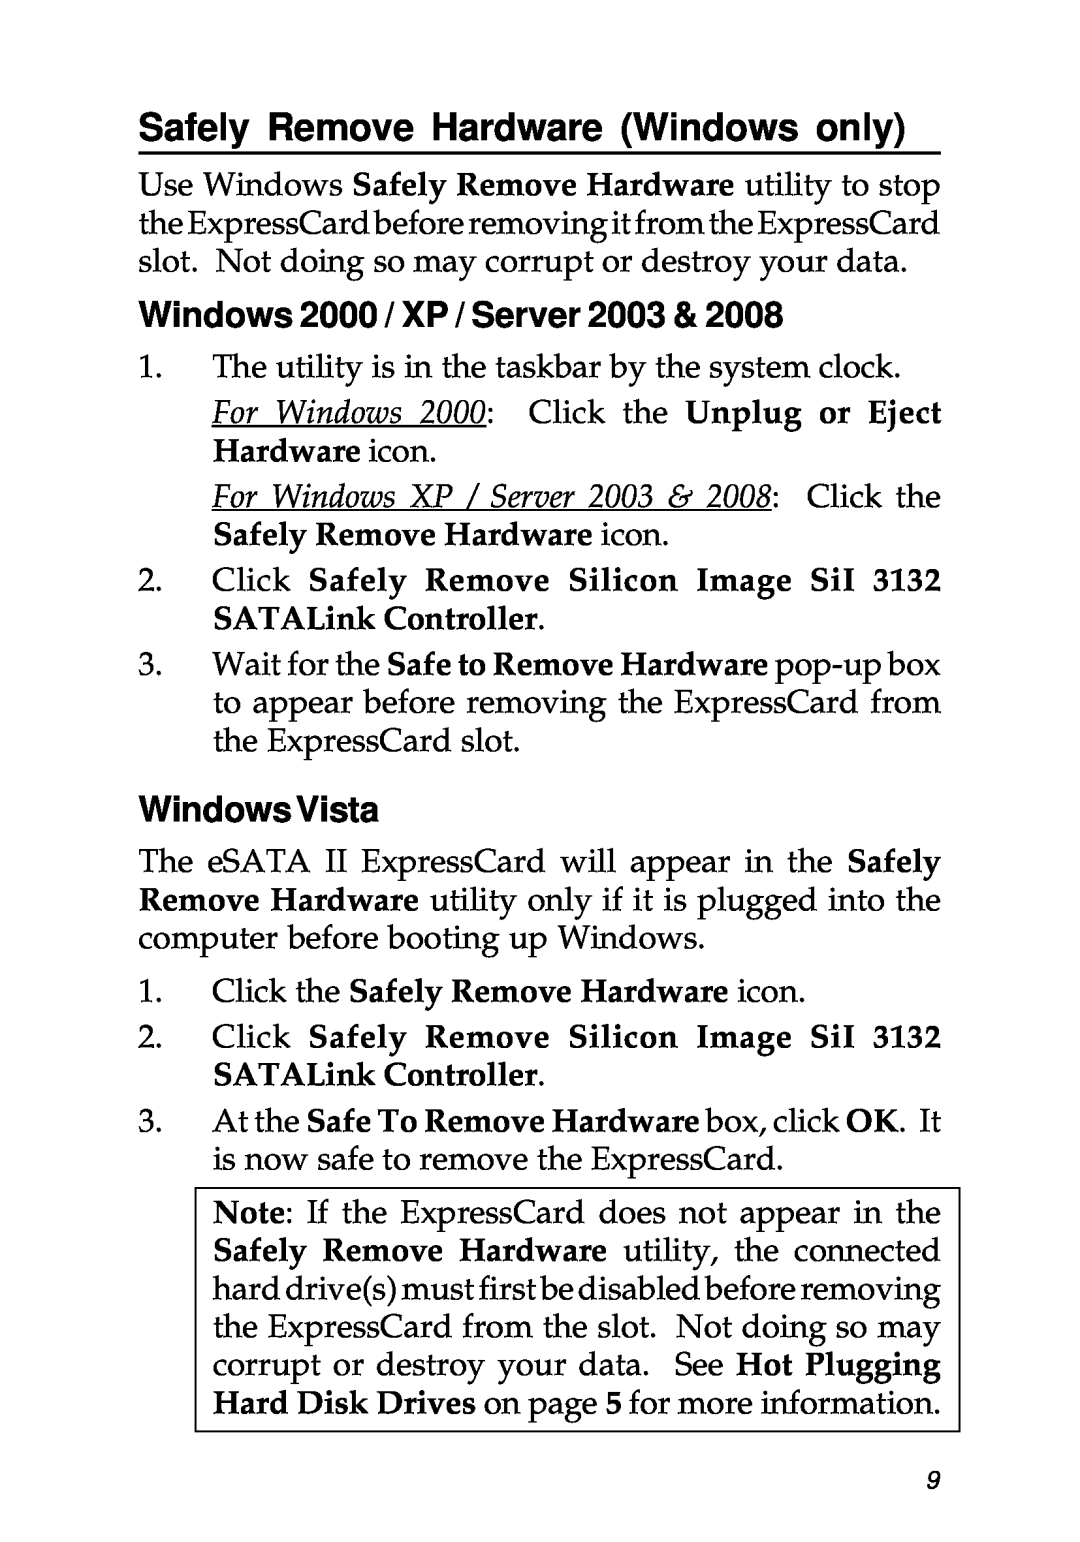 SIIG 104-0487A specifications Safely Remove Hardware Windows only, Windows 2000 / XP / Server 2003, Windows Vista 